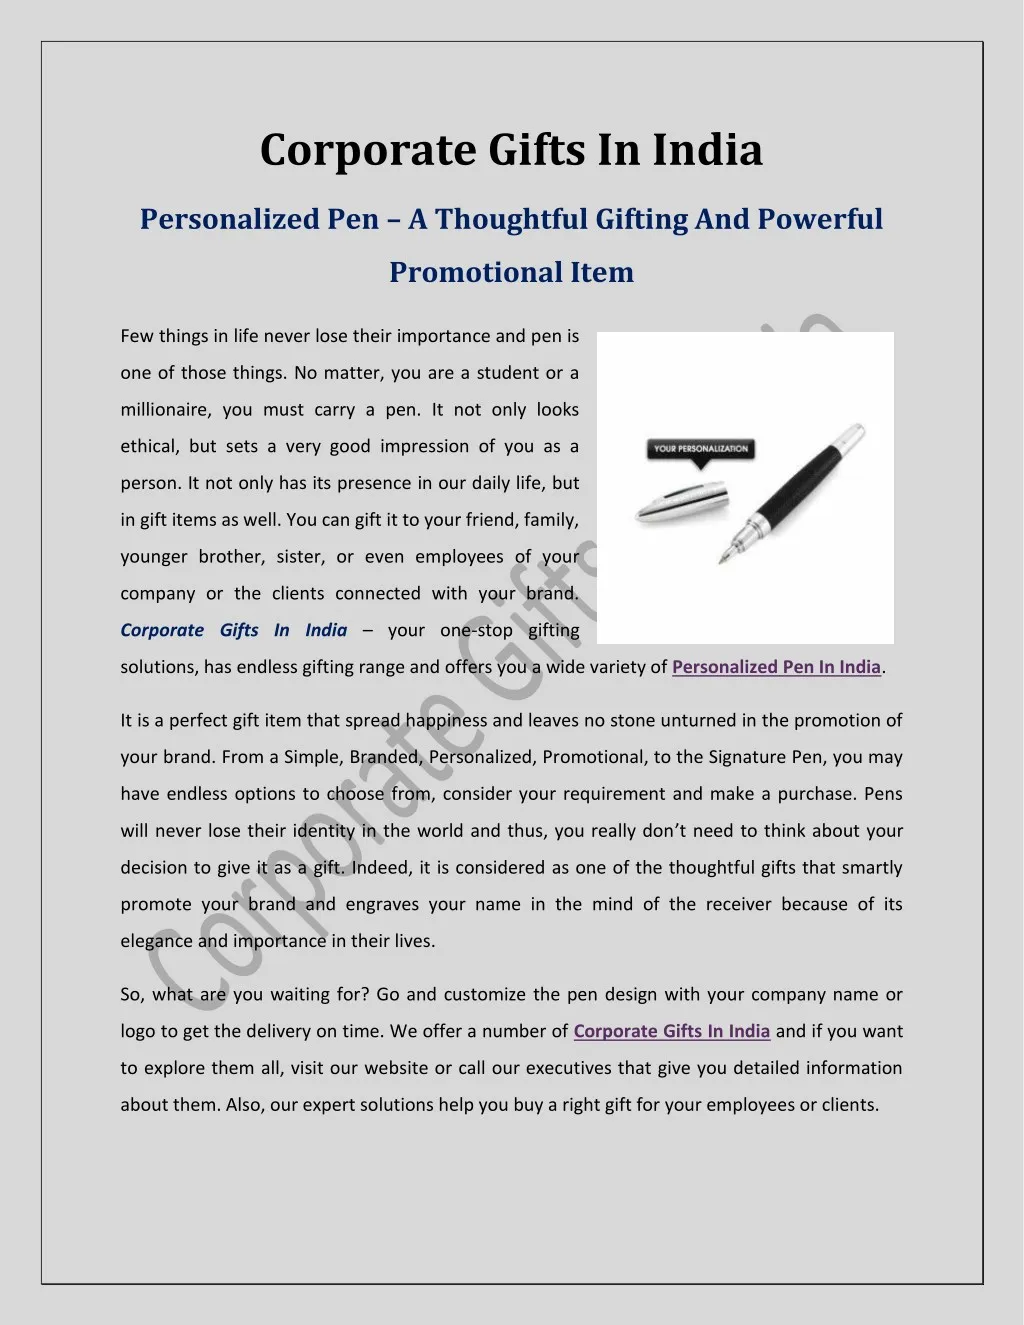 corporate gifts in india personalized